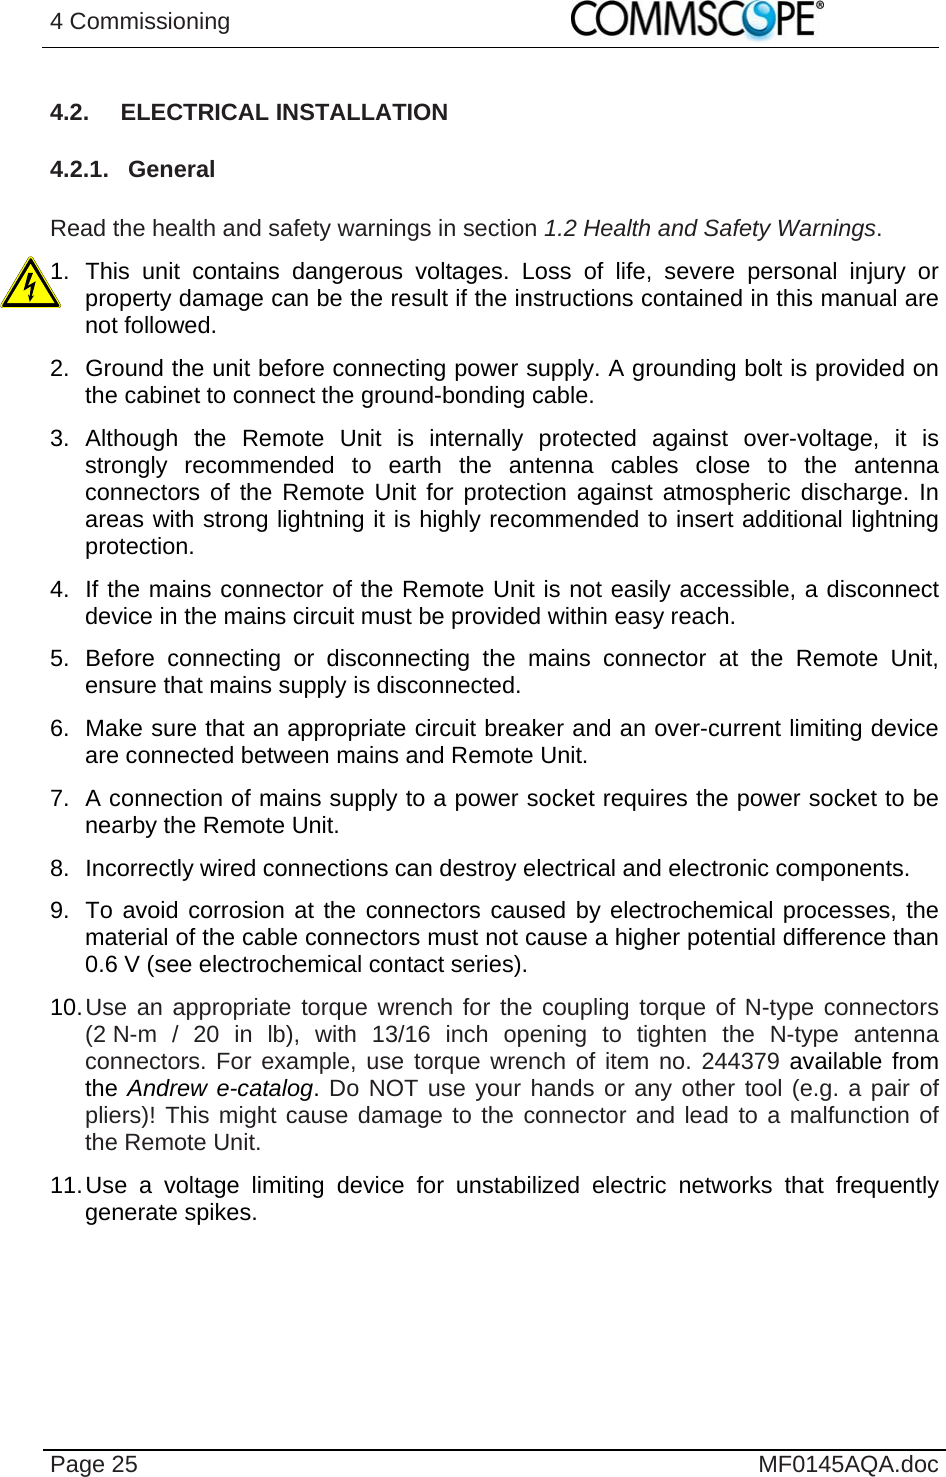 4 Commissioning    Page 25  MF0145AQA.doc 4.2. ELECTRICAL INSTALLATION 4.2.1. General  Read the health and safety warnings in section 1.2 Health and Safety Warnings. 1. This unit contains dangerous voltages. Loss of life, severe personal injury or property damage can be the result if the instructions contained in this manual are not followed. 2.  Ground the unit before connecting power supply. A grounding bolt is provided on the cabinet to connect the ground-bonding cable. 3. Although the Remote Unit is internally protected against over-voltage, it is strongly recommended to earth the antenna cables close to the antenna connectors of the Remote Unit for protection against atmospheric discharge. In areas with strong lightning it is highly recommended to insert additional lightning protection. 4.  If the mains connector of the Remote Unit is not easily accessible, a disconnect device in the mains circuit must be provided within easy reach. 5. Before connecting or disconnecting the mains connector at the Remote Unit, ensure that mains supply is disconnected. 6.  Make sure that an appropriate circuit breaker and an over-current limiting device are connected between mains and Remote Unit. 7.  A connection of mains supply to a power socket requires the power socket to be nearby the Remote Unit. 8.  Incorrectly wired connections can destroy electrical and electronic components. 9.  To avoid corrosion at the connectors caused by electrochemical processes, the material of the cable connectors must not cause a higher potential difference than 0.6 V (see electrochemical contact series). 10. Use an appropriate torque wrench for the coupling torque of N-type connectors (2 N-m / 20 in lb), with 13/16 inch opening to tighten the N-type antenna connectors. For example, use torque wrench of item no. 244379 available from the Andrew e-catalog. Do NOT use your hands or any other tool (e.g. a pair of pliers)! This might cause damage to the connector and lead to a malfunction of the Remote Unit. 11. Use a voltage limiting device for unstabilized electric networks that frequently generate spikes.  